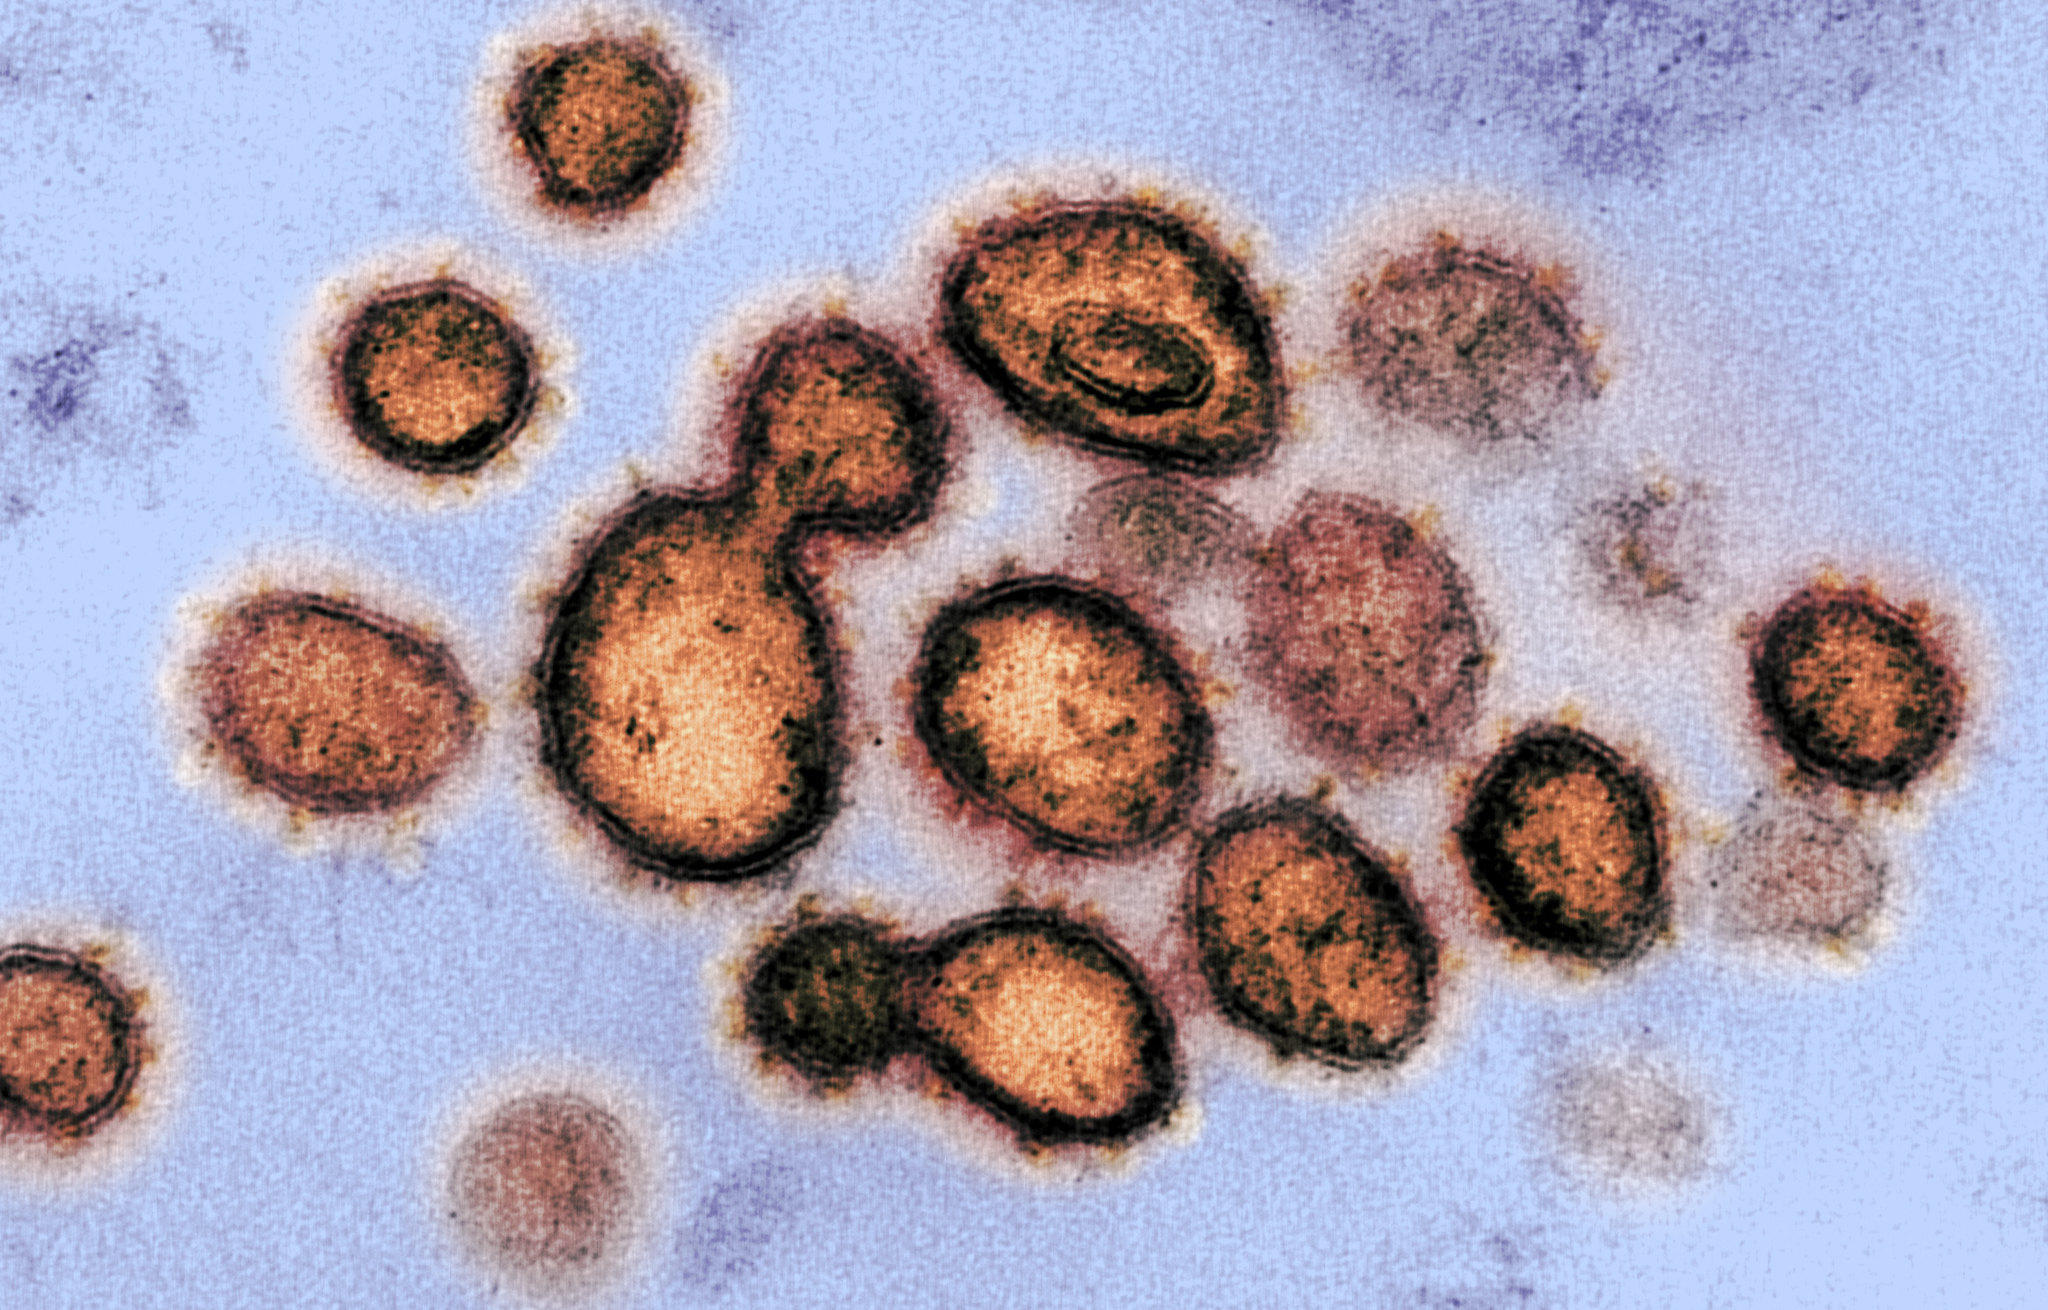 coronavirus-101-what-we-do-and-don-t-know-about-the-outbreak-of